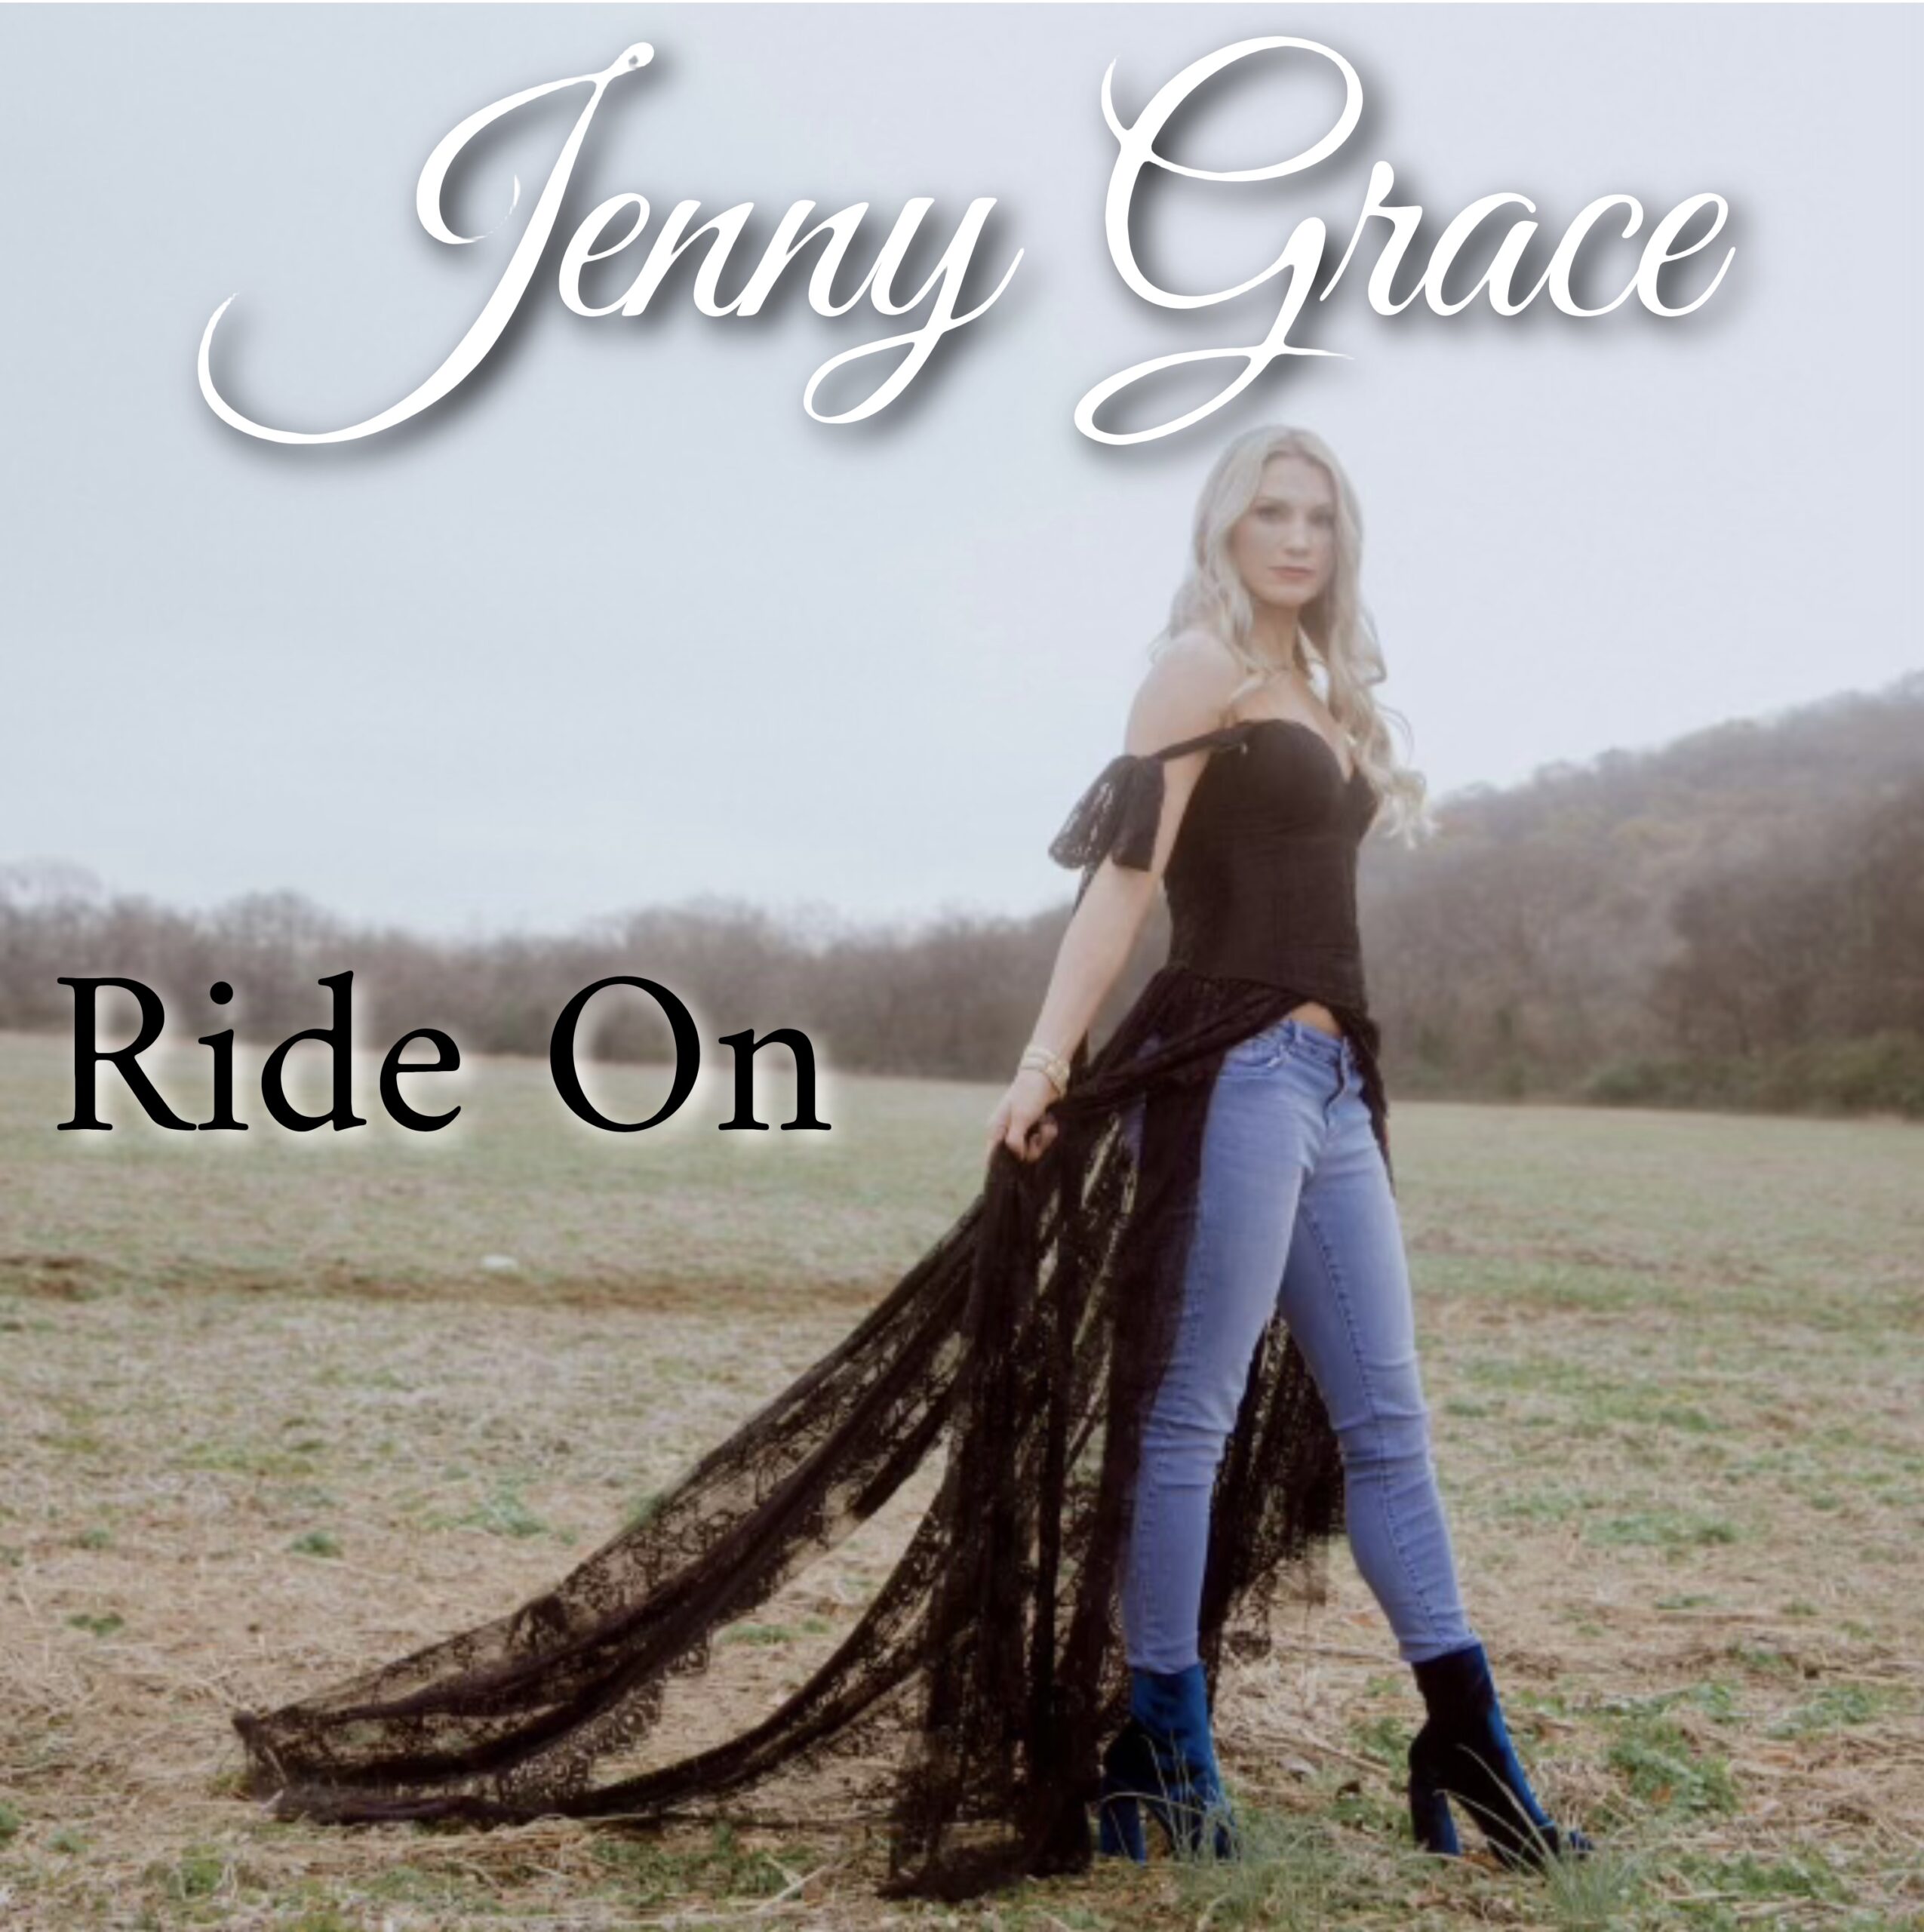 Nashville Recording Artist Jenny Grace’s Highly Anticipated New Single “Ride On” Now Available